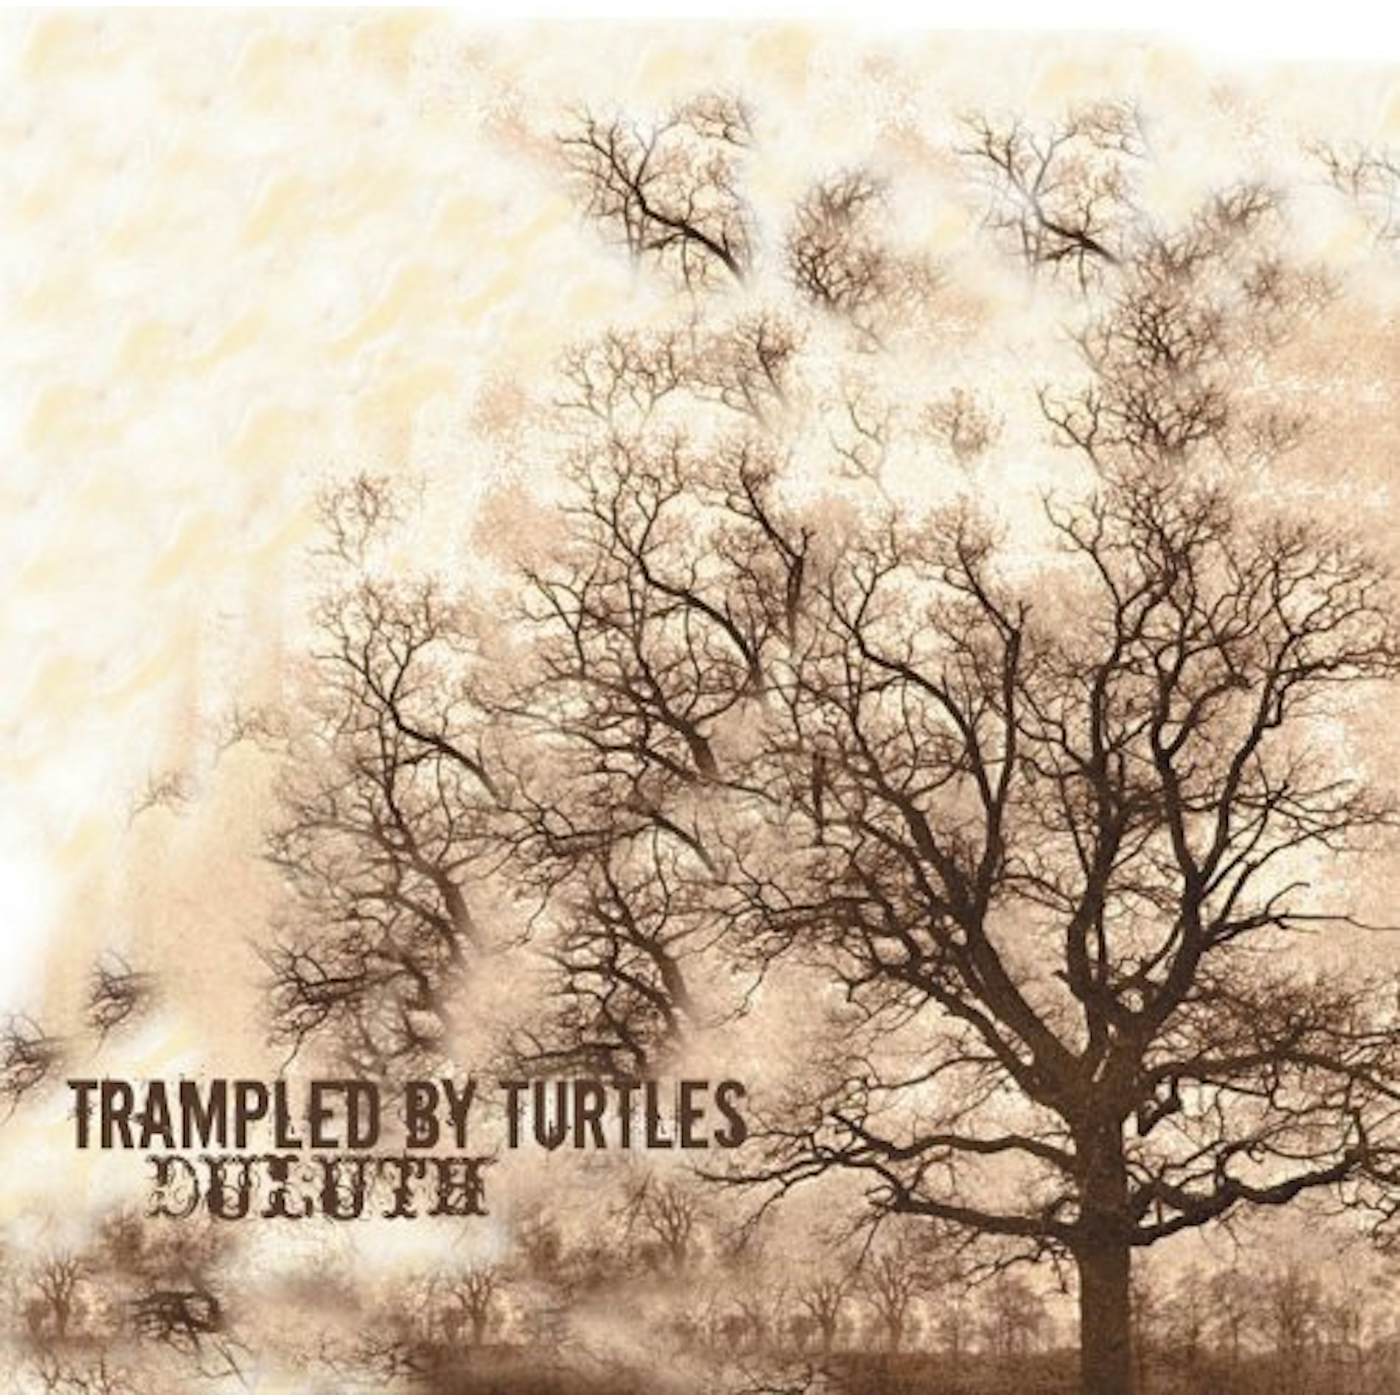 Trampled by Turtles Duluth Vinyl Record